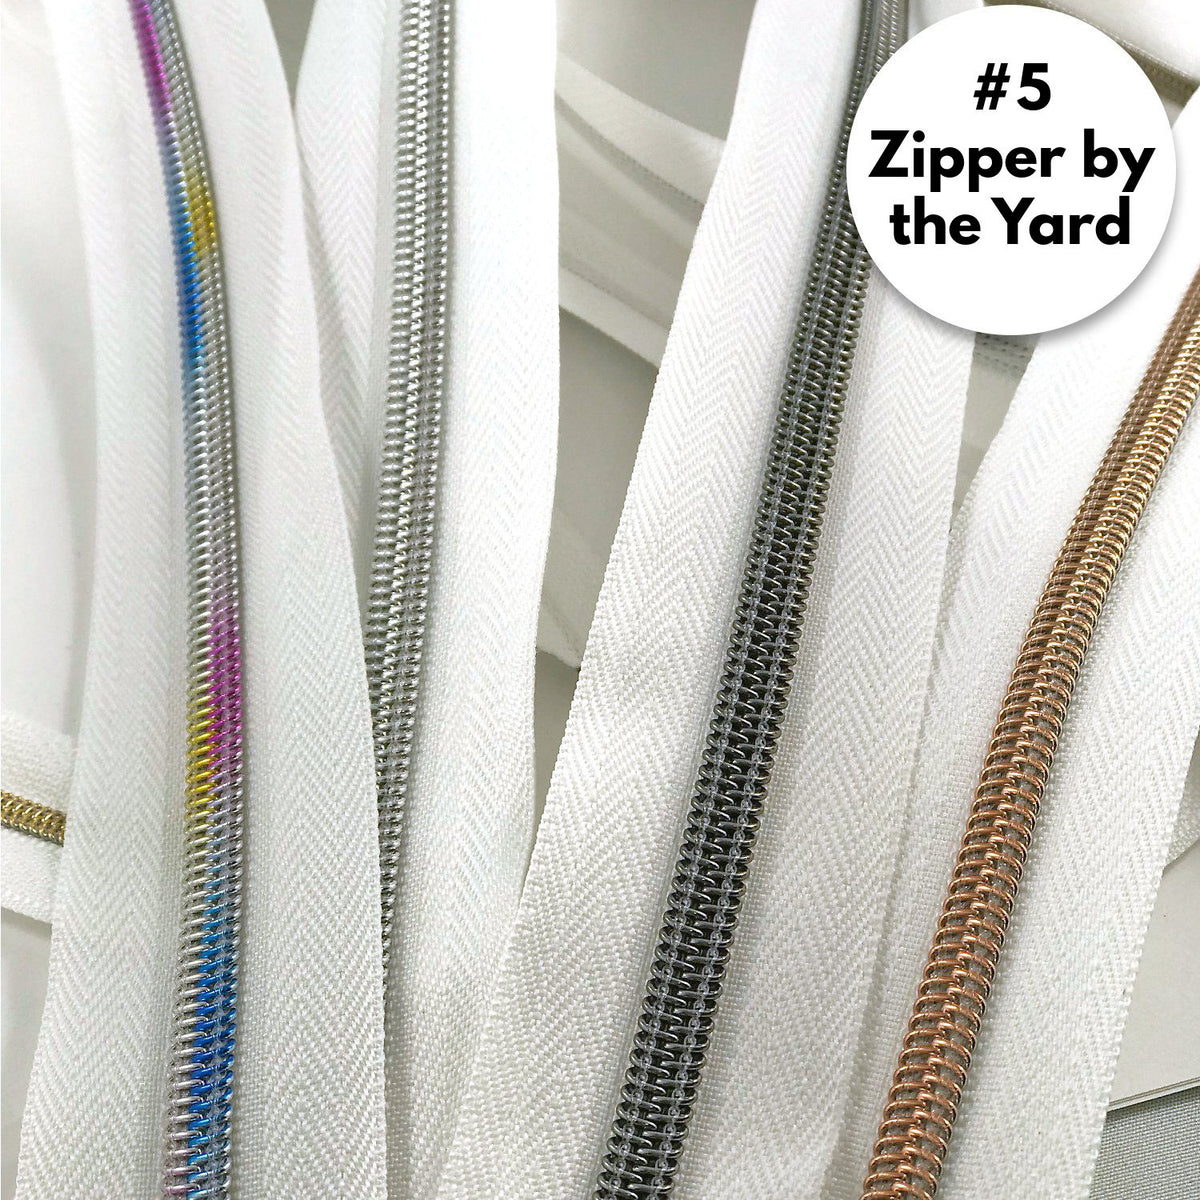 PECMER Zipper Tape by The Yard #5 with Pulls-Bulk Nylon Coil Zipper by The Yard Black 10 Yards Replacement - Long Zippers for Sewing Assorted